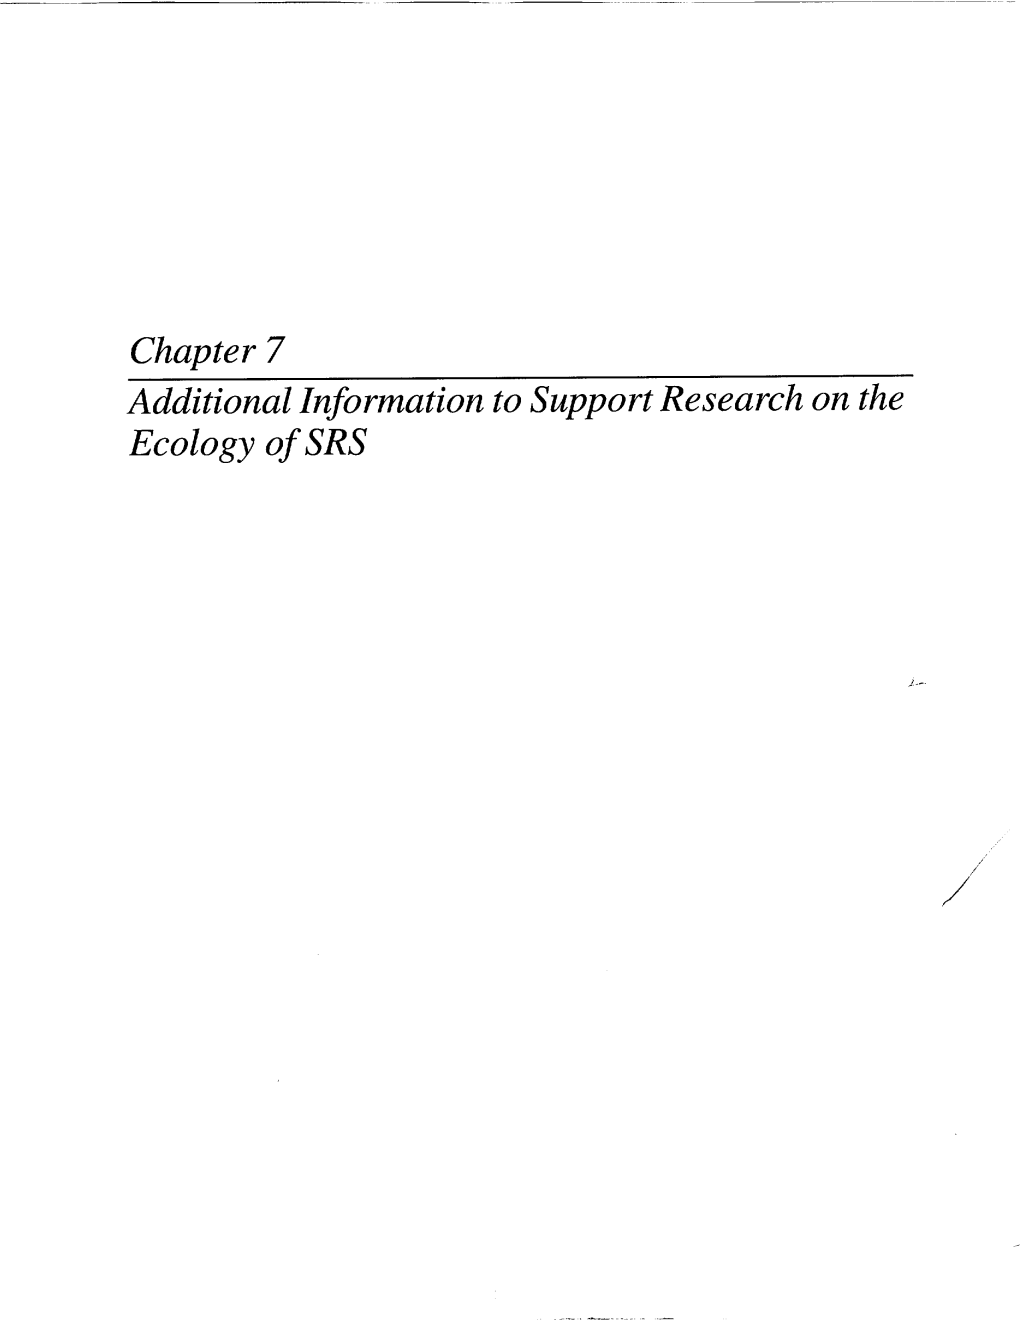 "SRS Ecology Environmental Information Document," Chapter 7